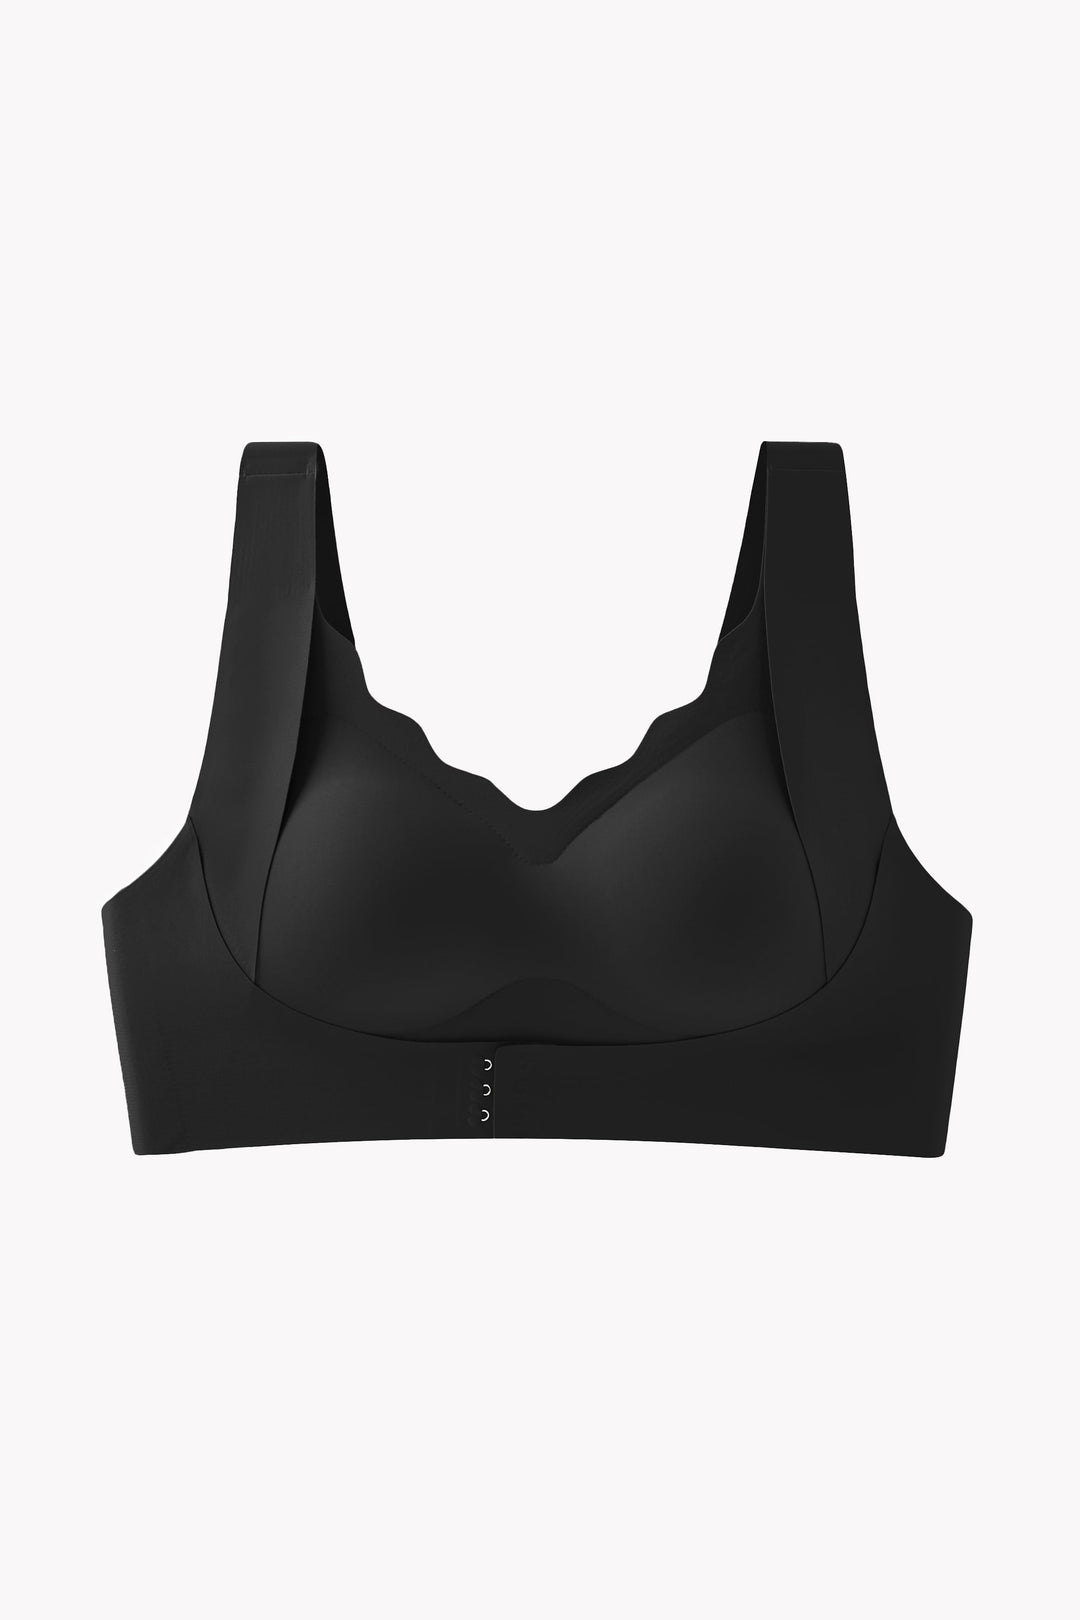 POSESHE Easy Pieces™️ Front Closure Push-Up Wire-Free Bra